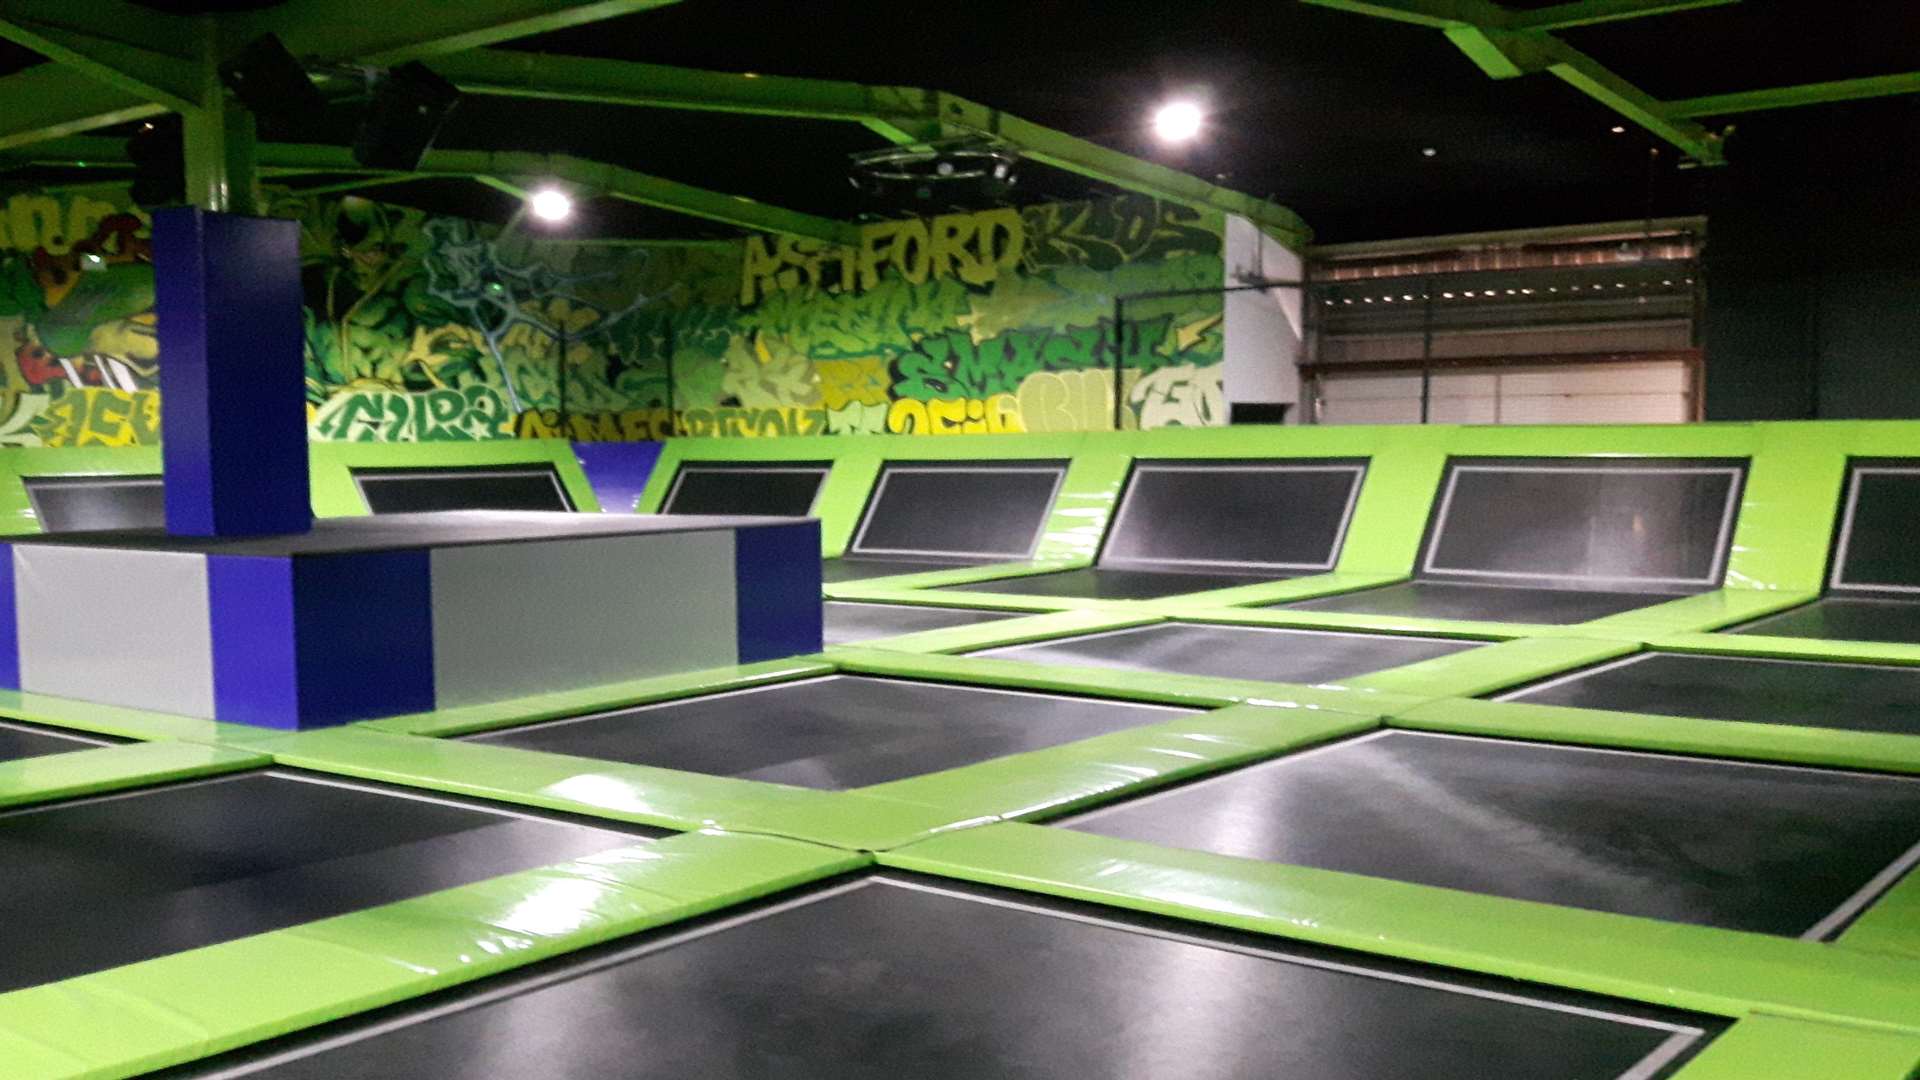 The connecting trampolines